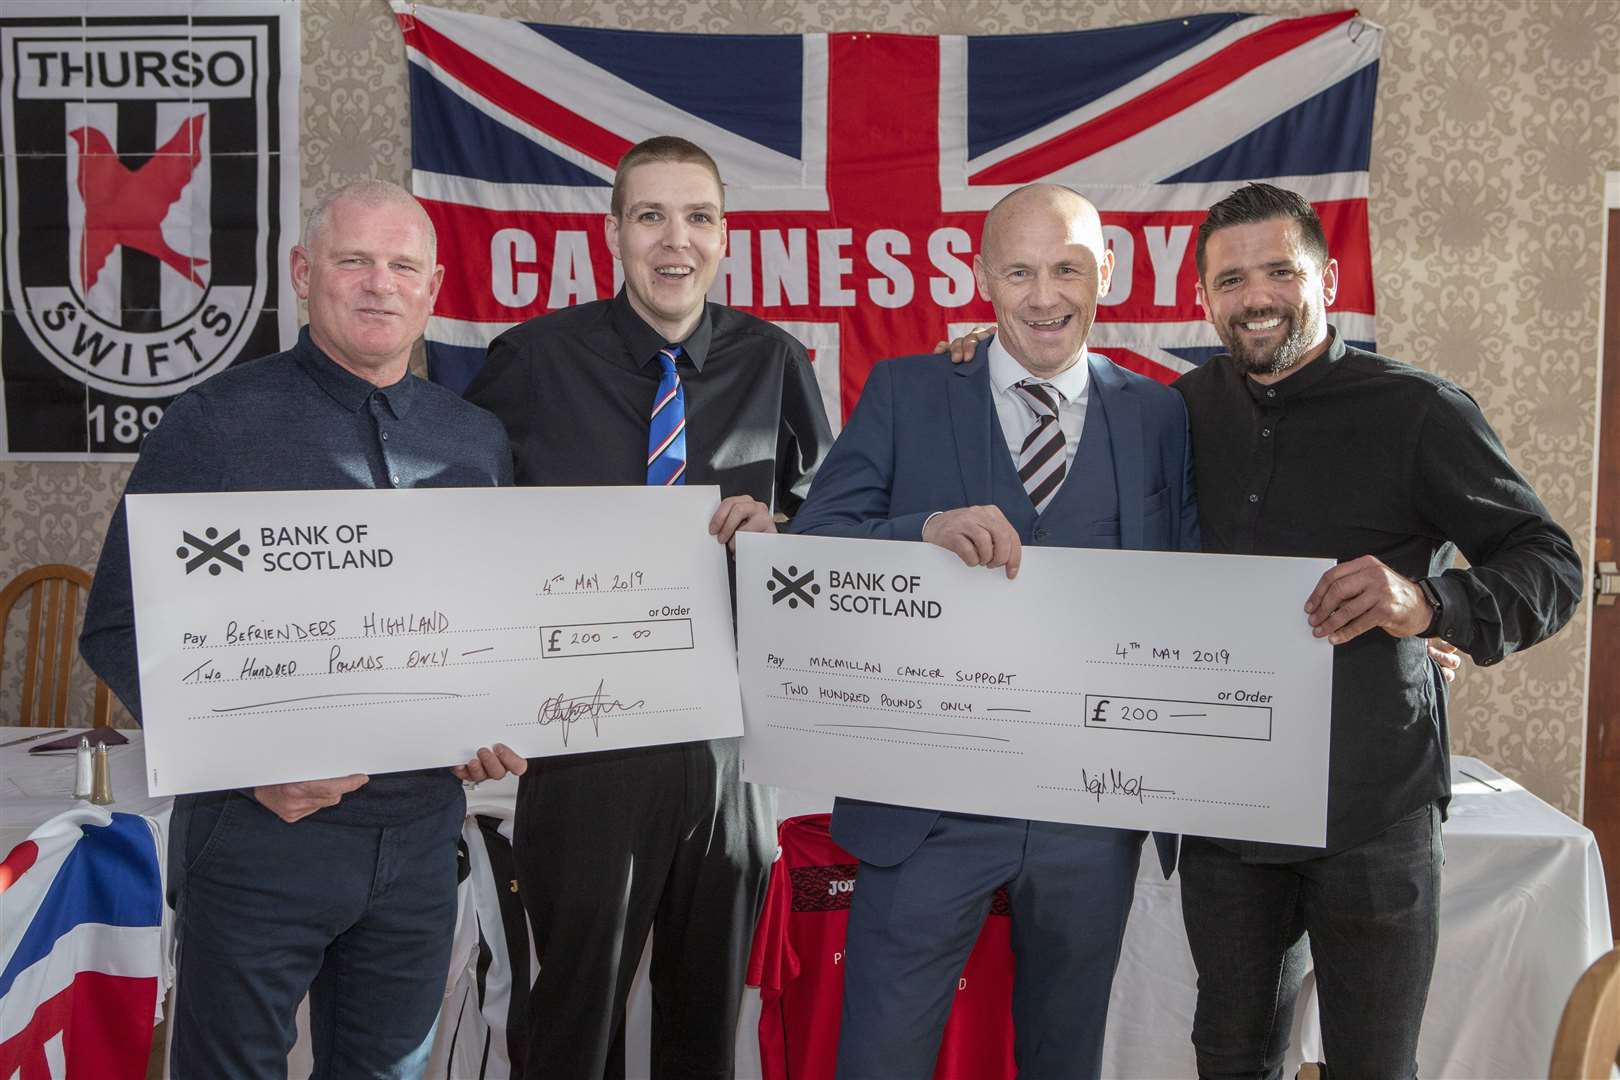 Alyn Gunn (second from left) and Nigel Mackenzie (second from right) with the charity cheques for Befrienders Highland and Macmillan Cancer Support, held here by Ian Durrant and Nacho Novo. Picture: John Baikie